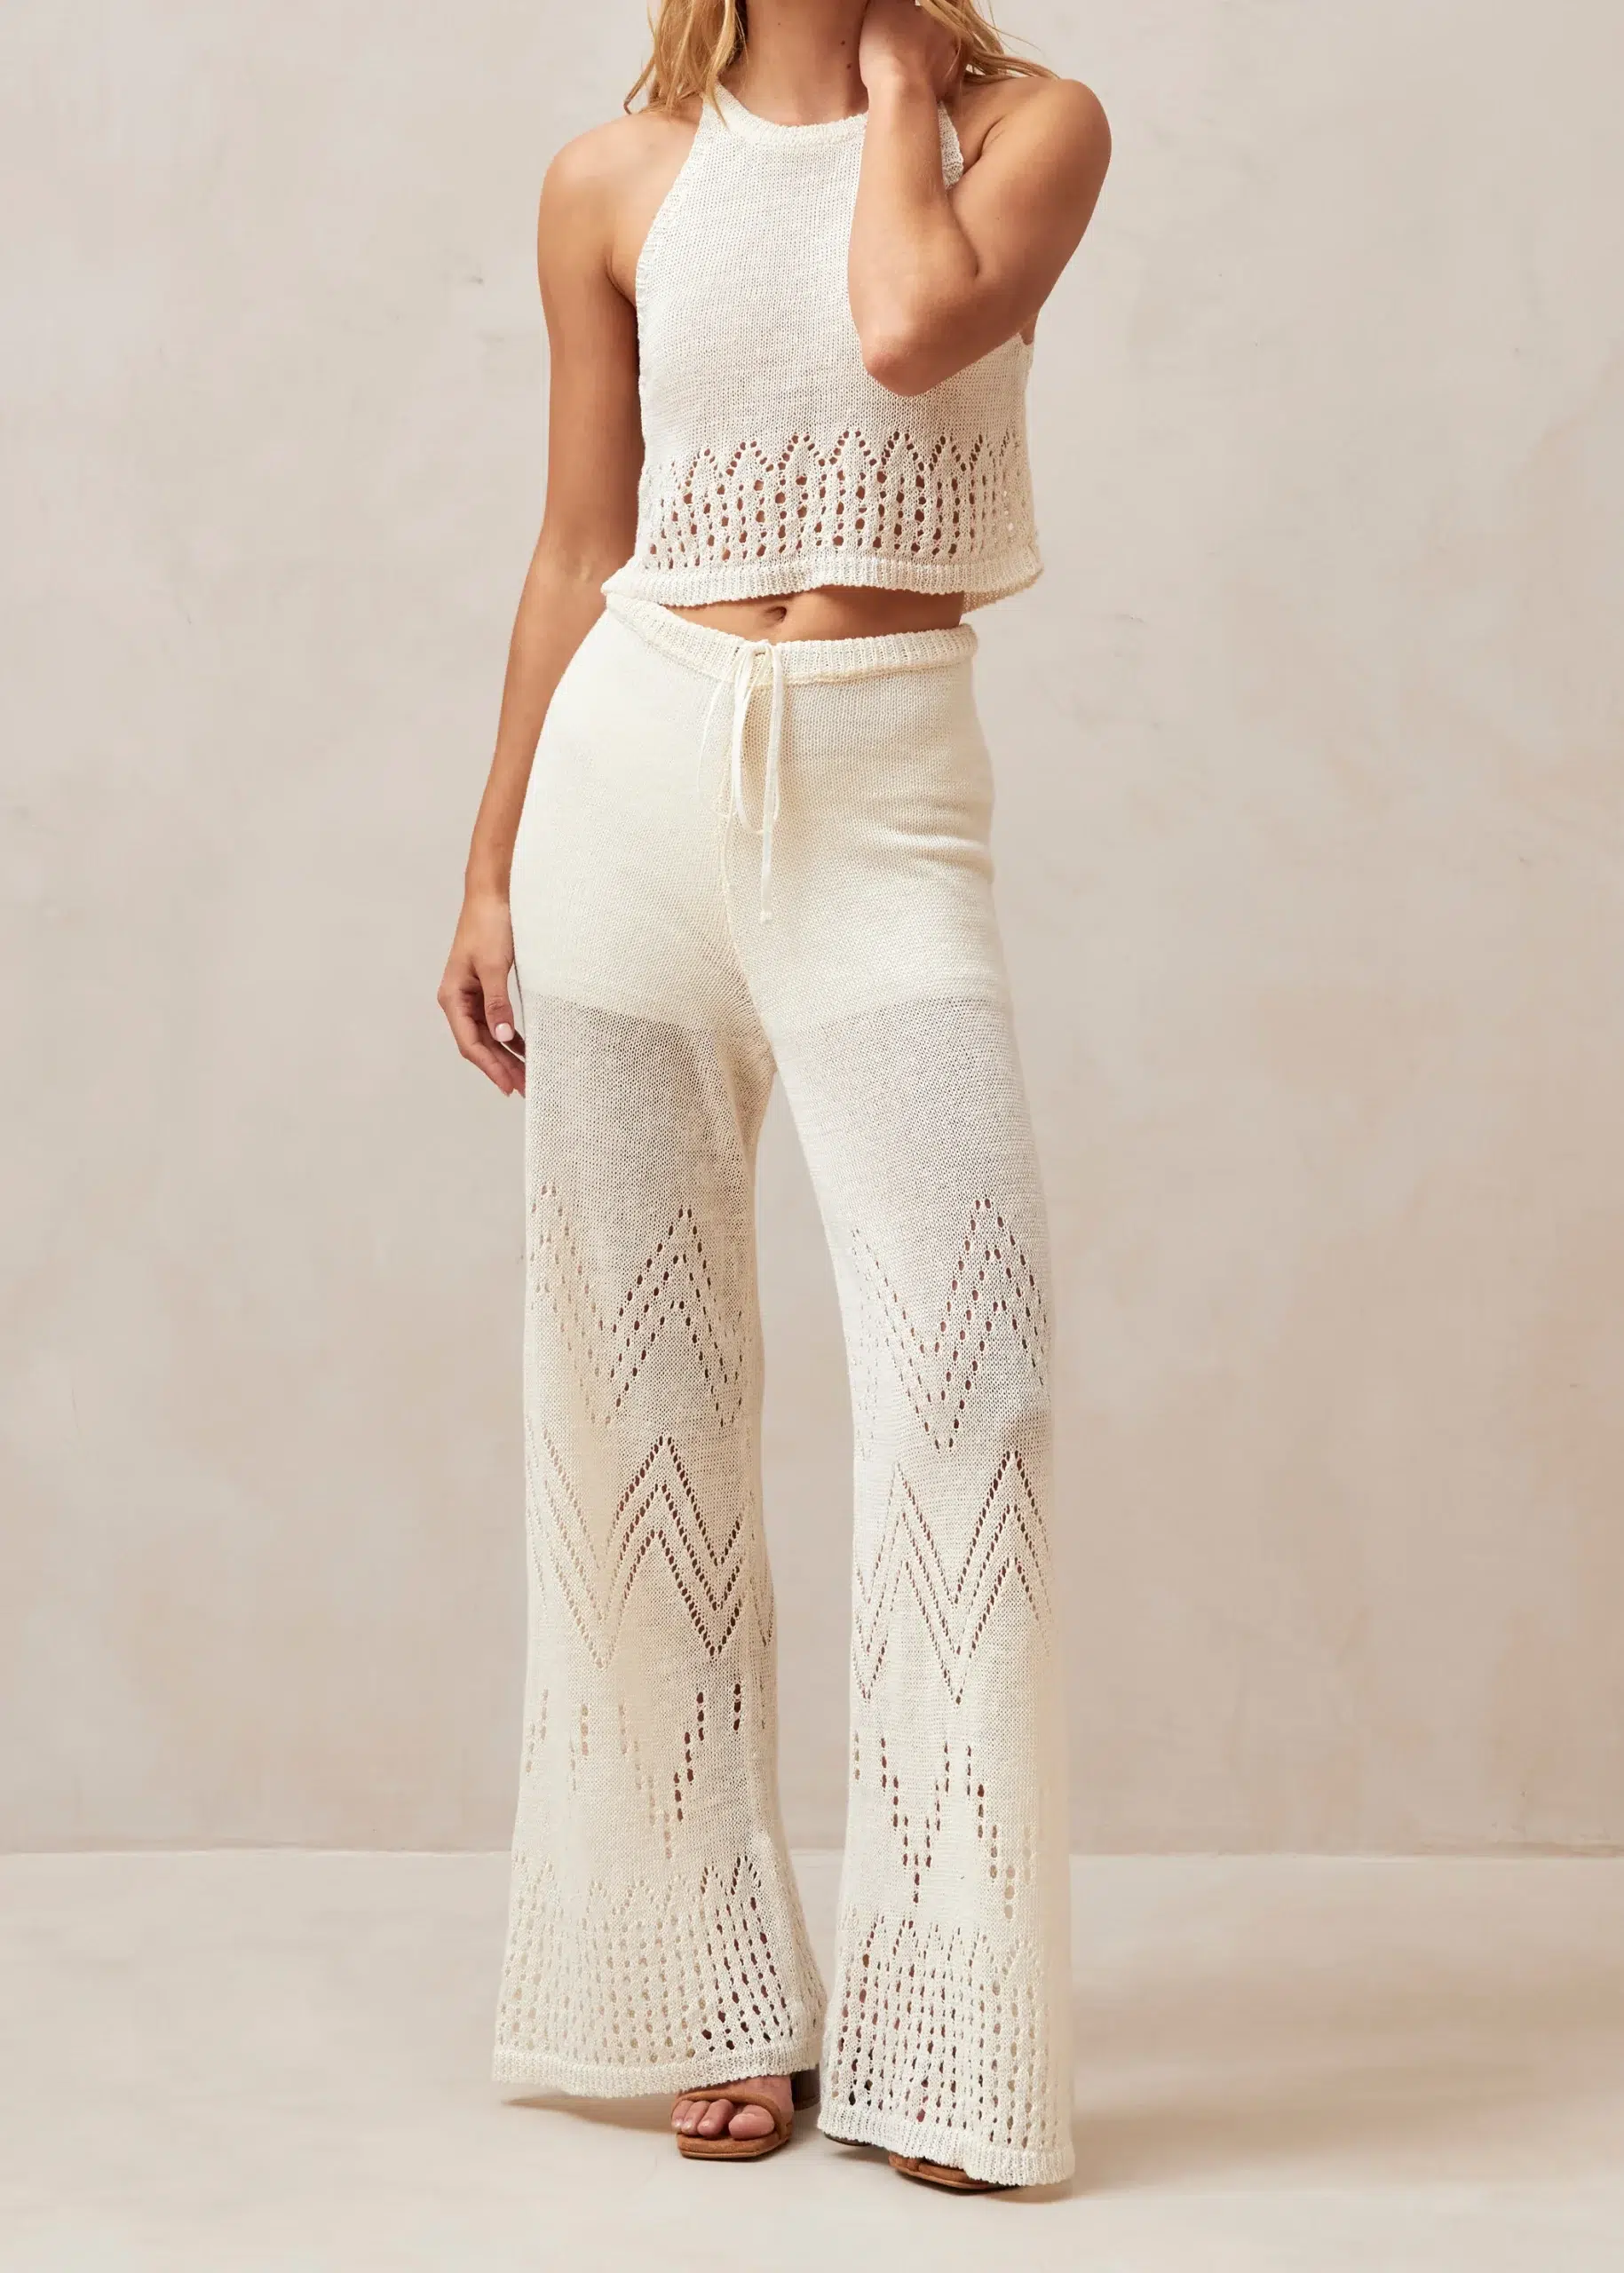 image of a body wearing a knit tank top and pants in cream color